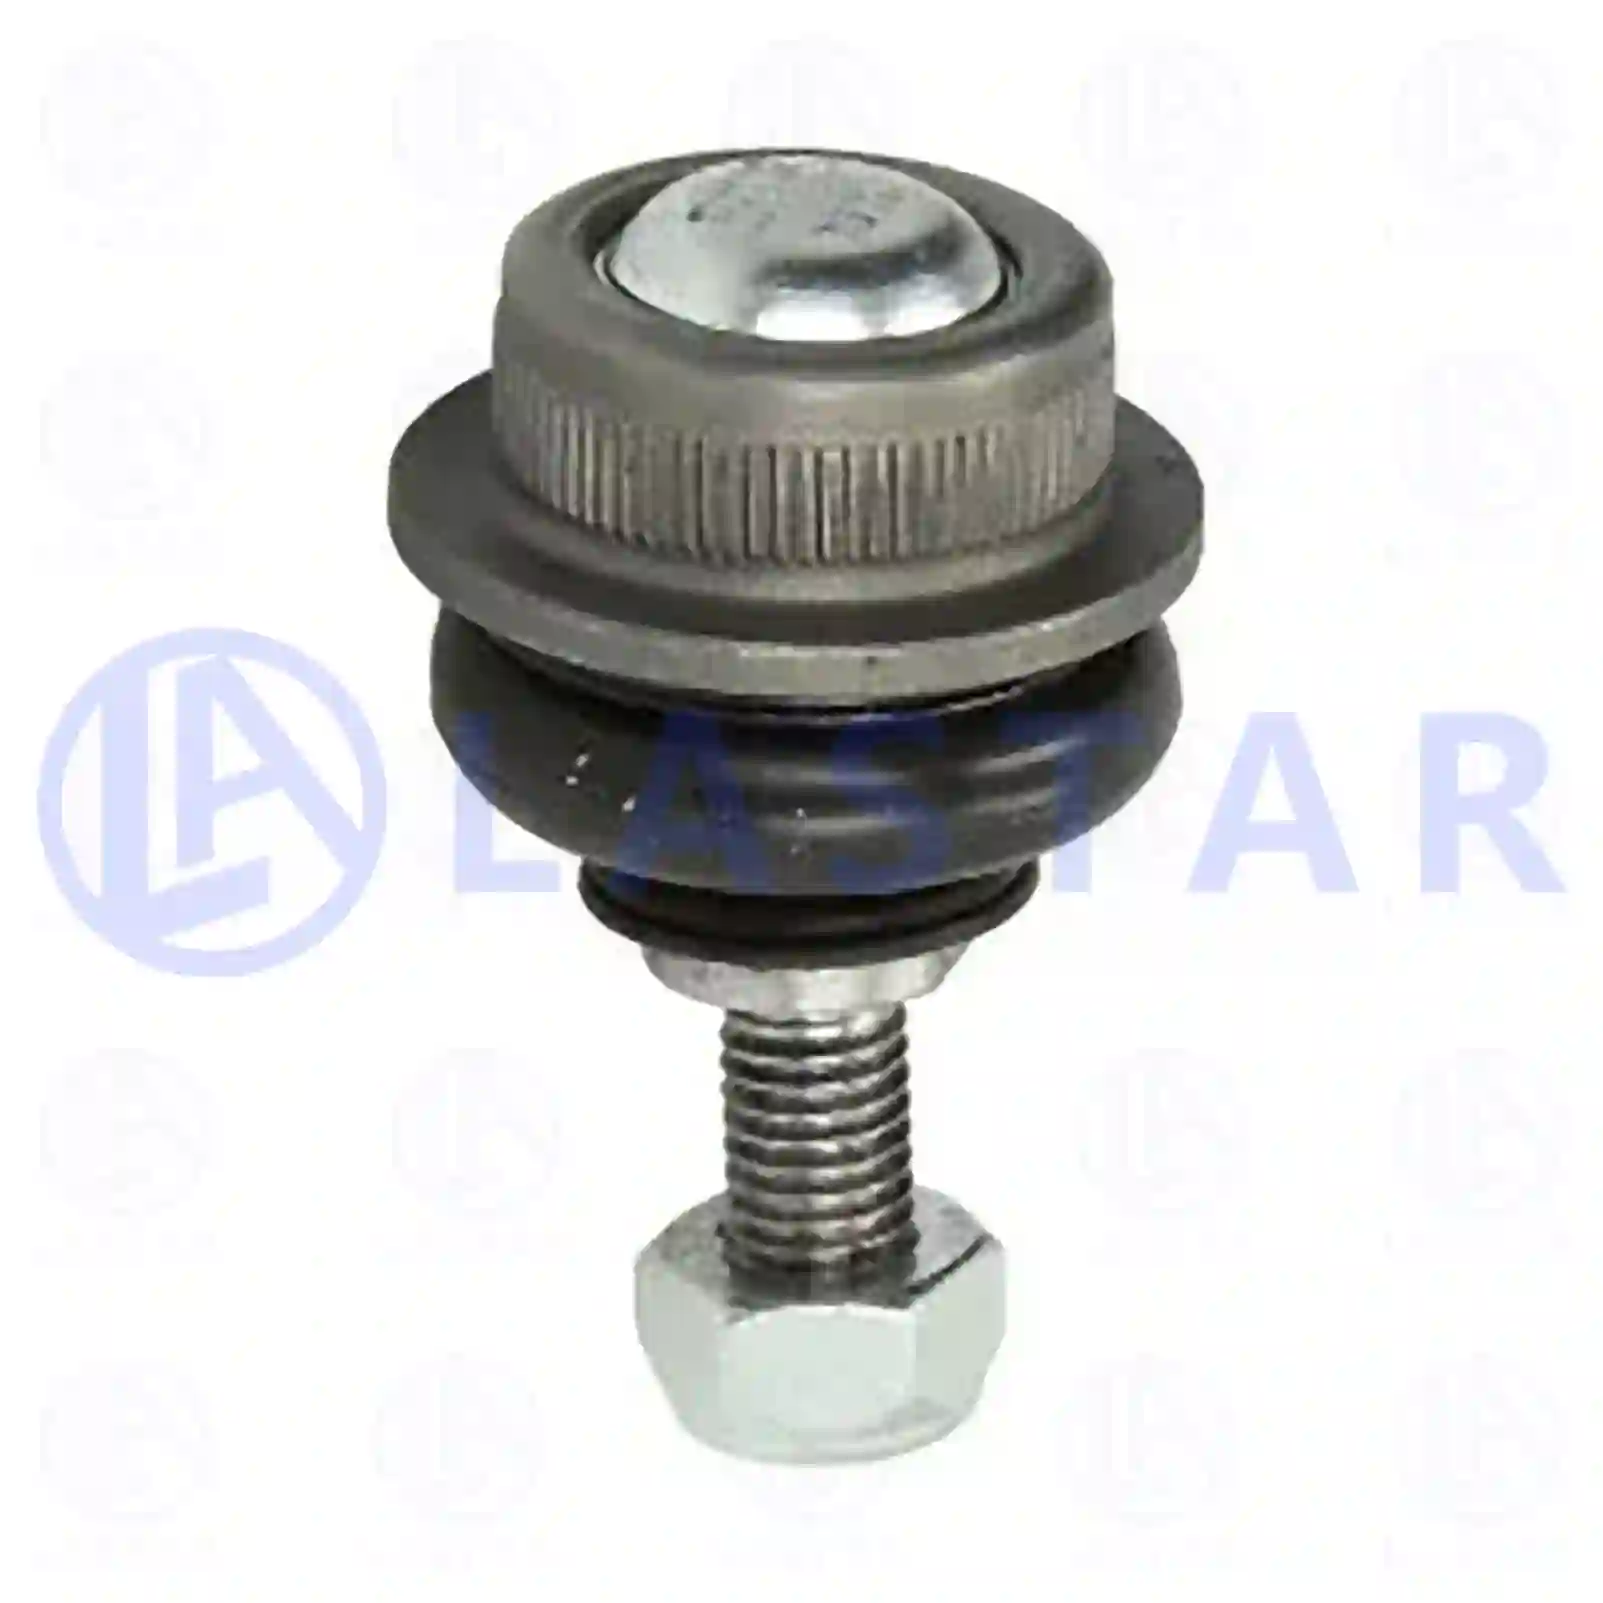 Ball joint, 77733265, 1330987 ||  77733265 Lastar Spare Part | Truck Spare Parts, Auotomotive Spare Parts Ball joint, 77733265, 1330987 ||  77733265 Lastar Spare Part | Truck Spare Parts, Auotomotive Spare Parts